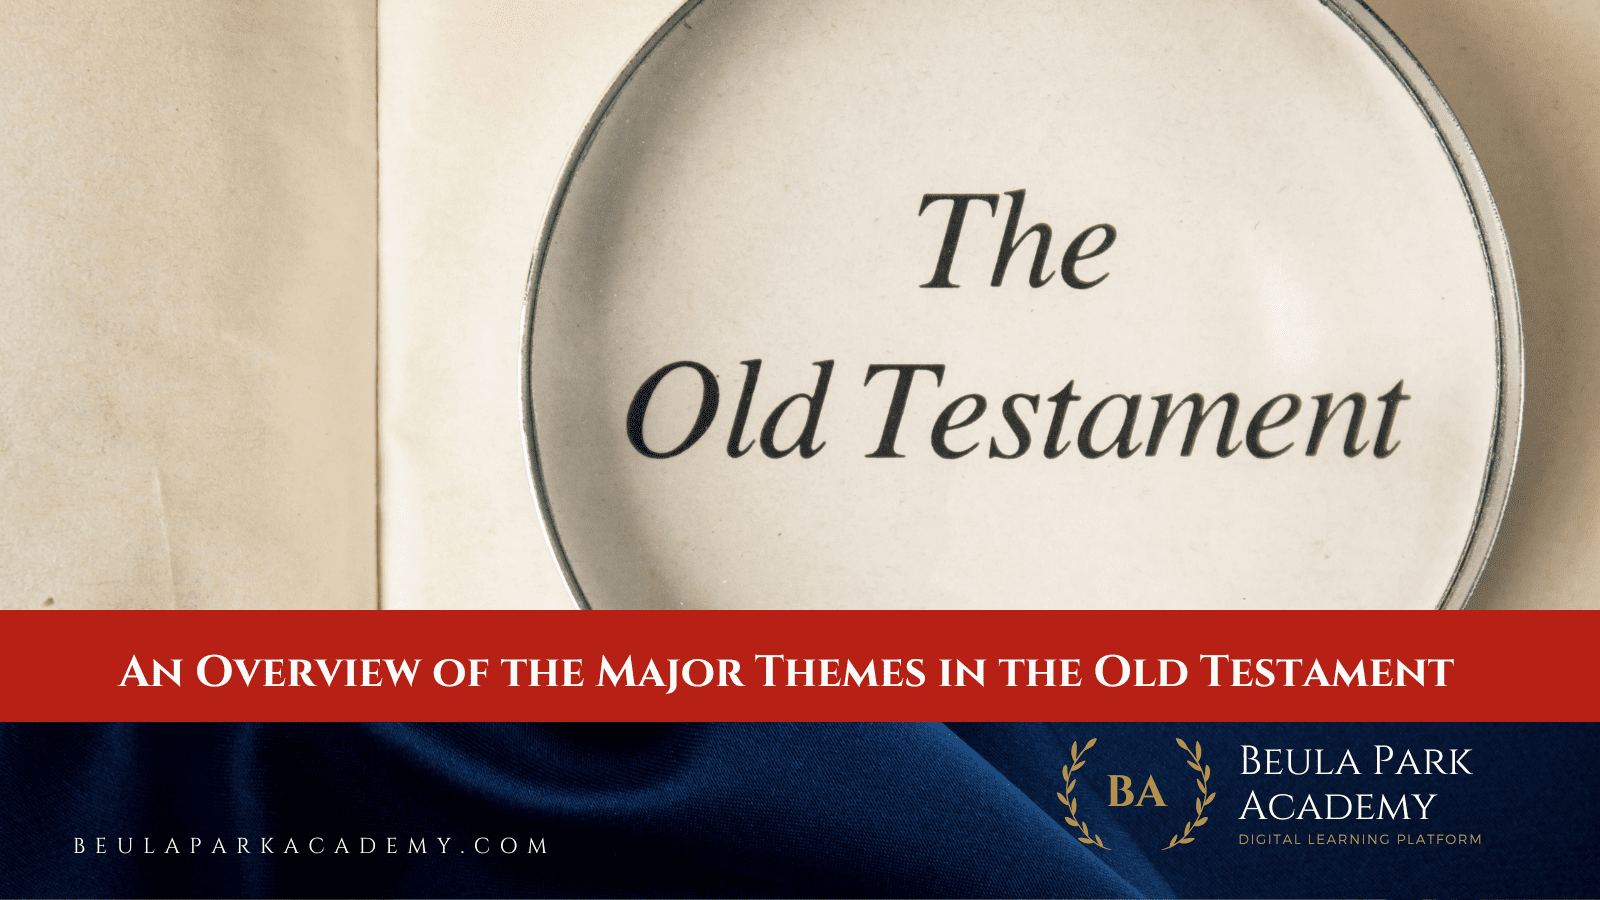 An Overview of the Major Themes in the Old Testament